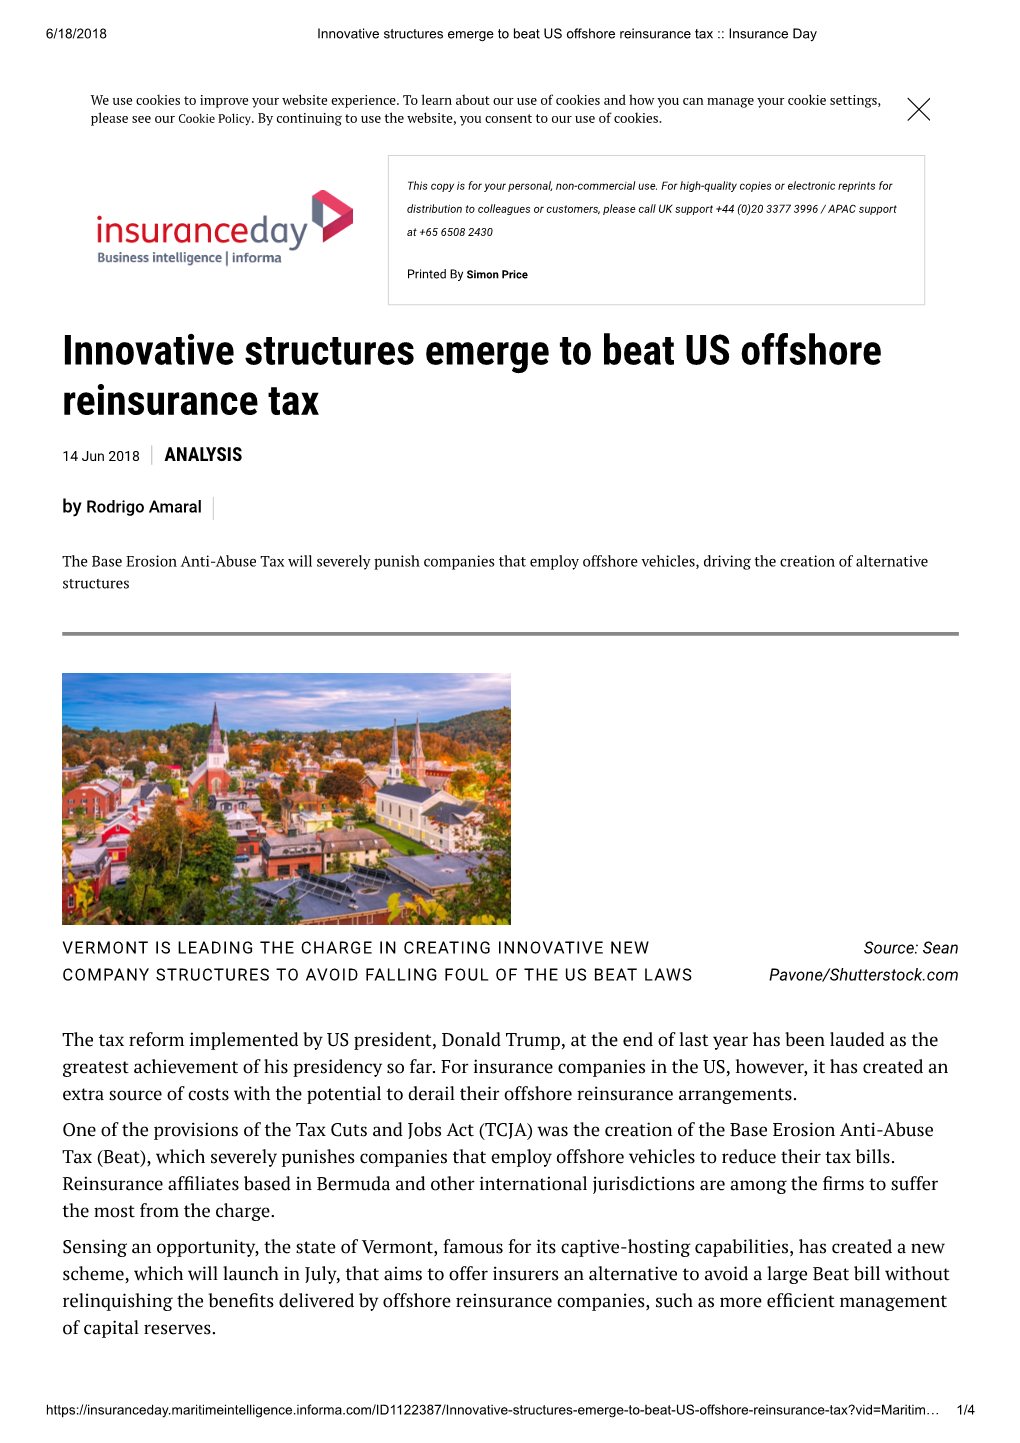 Innovative Structures Emerge to Beat US Offshore Reinsurance Tax :: Insurance Day